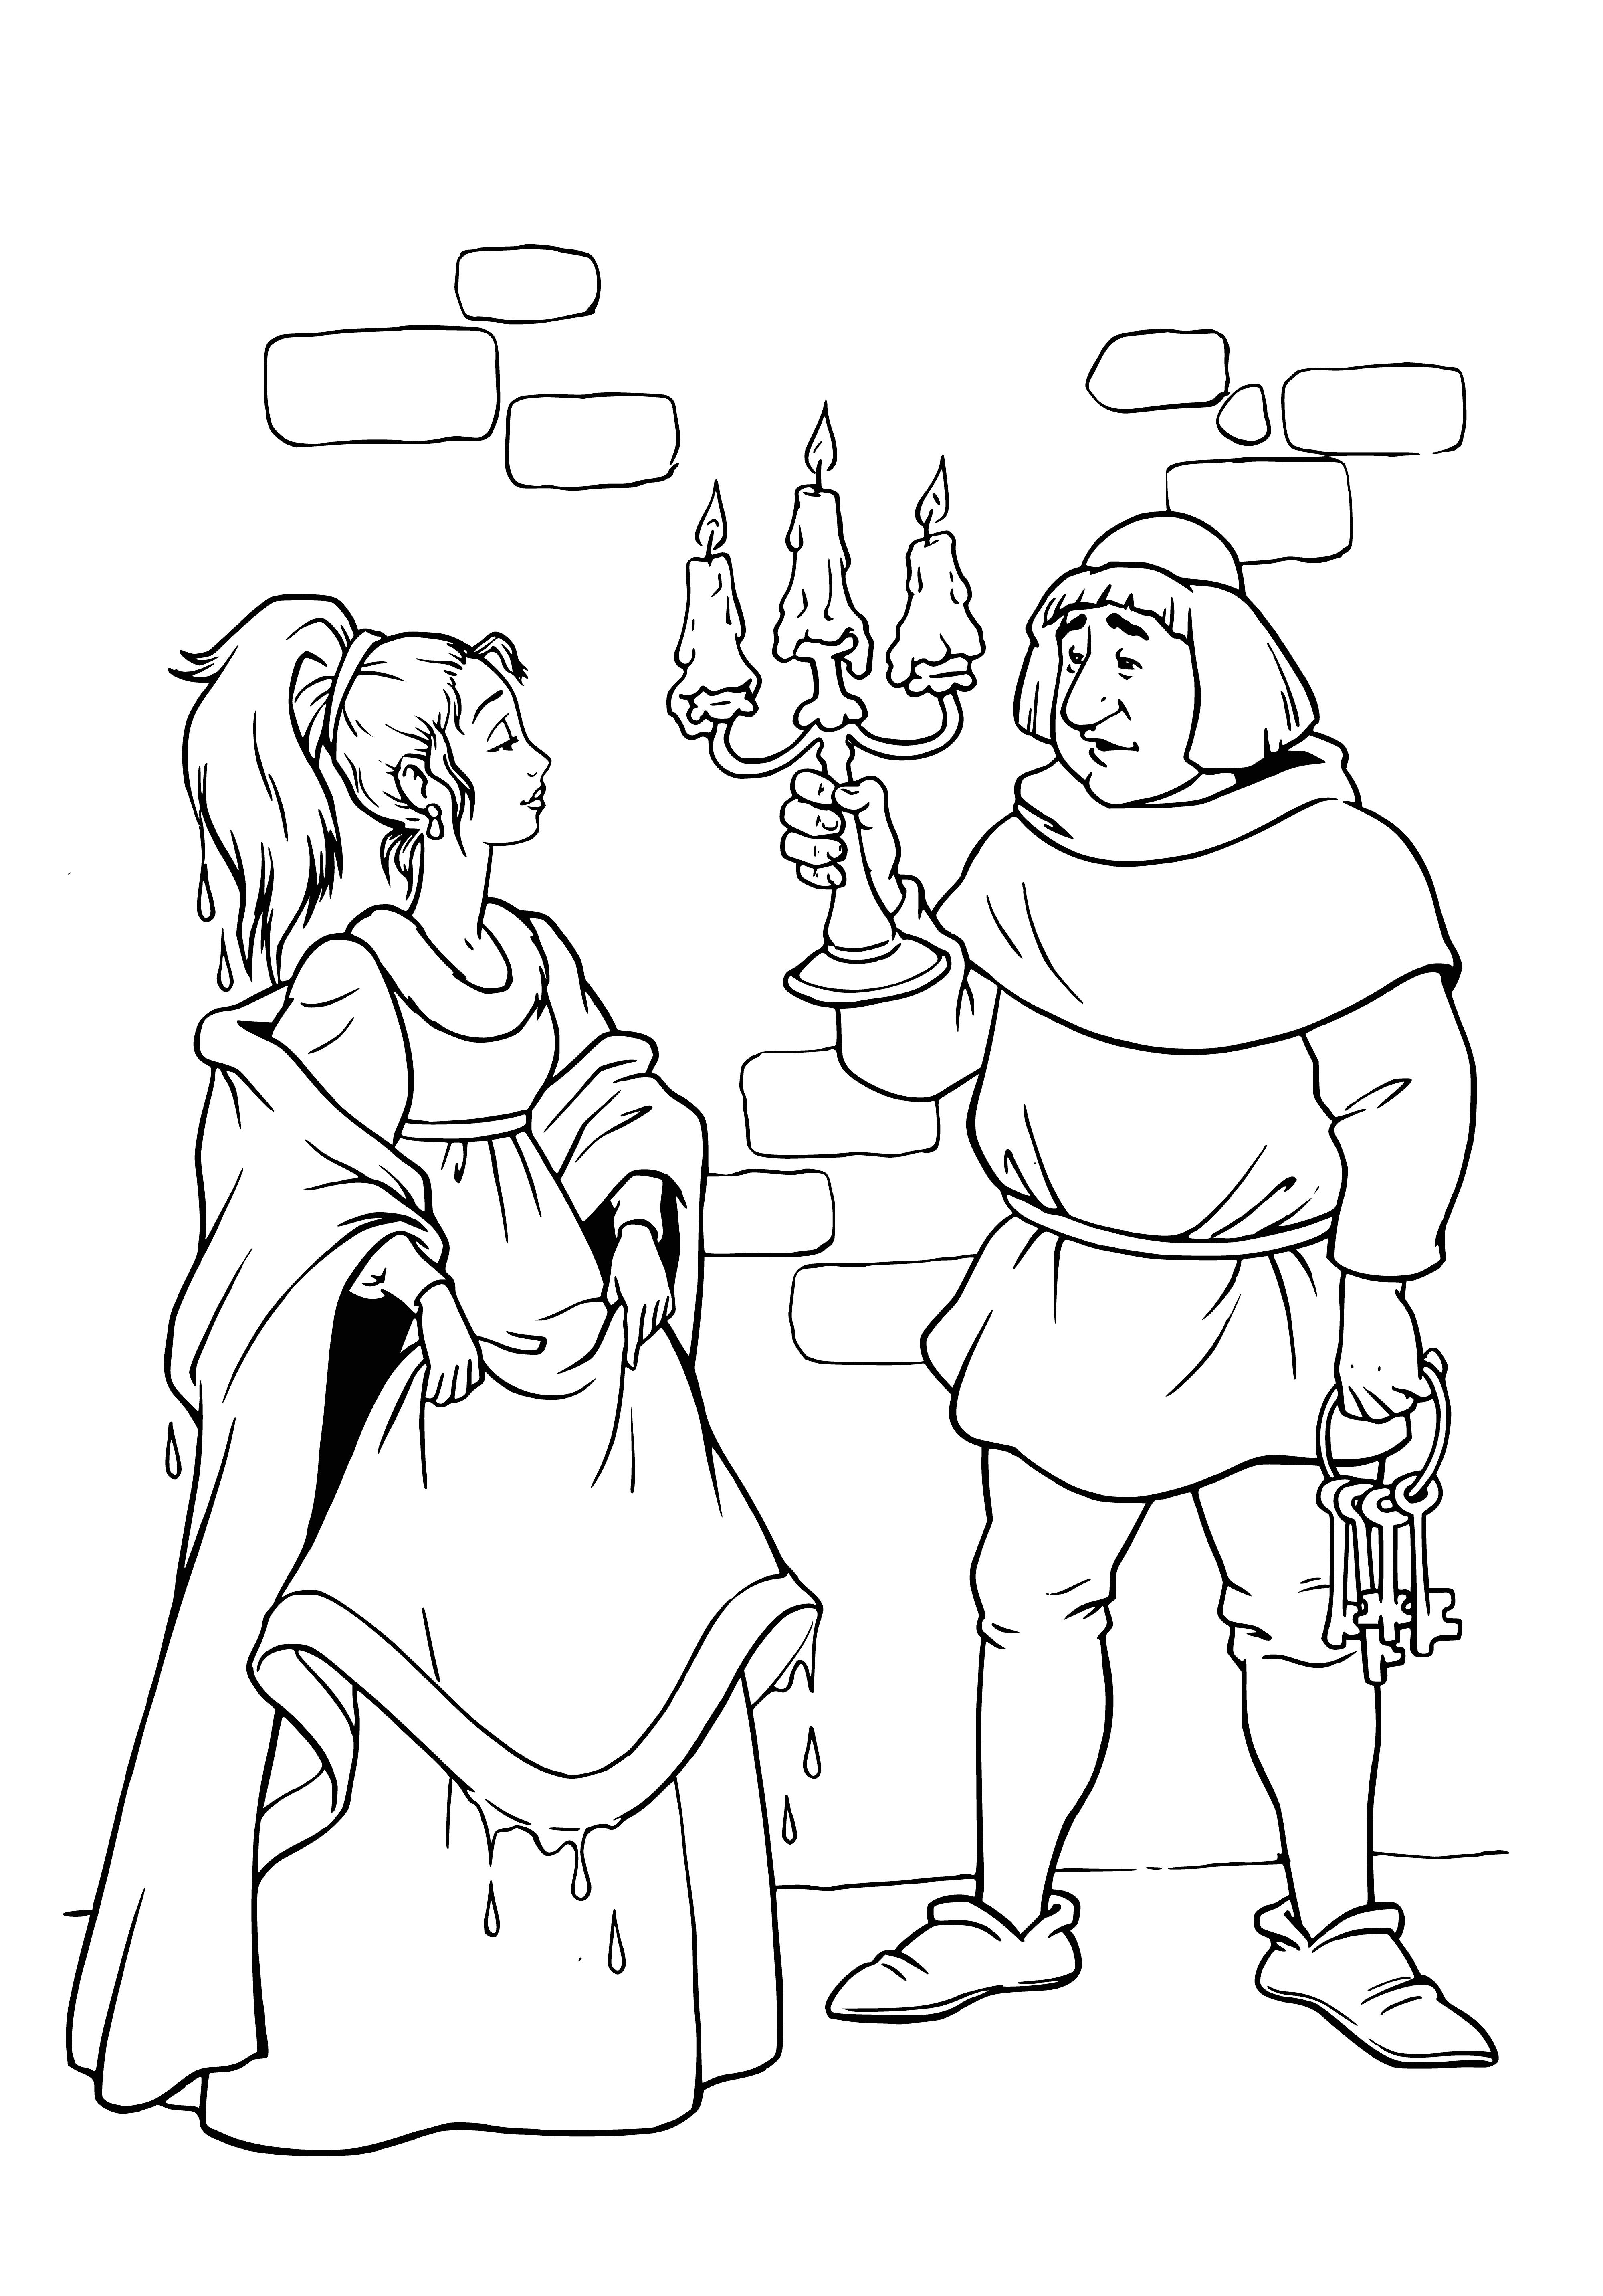 coloring page: The Princess and Prince smile at each other in the palace, her in her dress, crown, and scepter, him in his suit of armor. #royalty